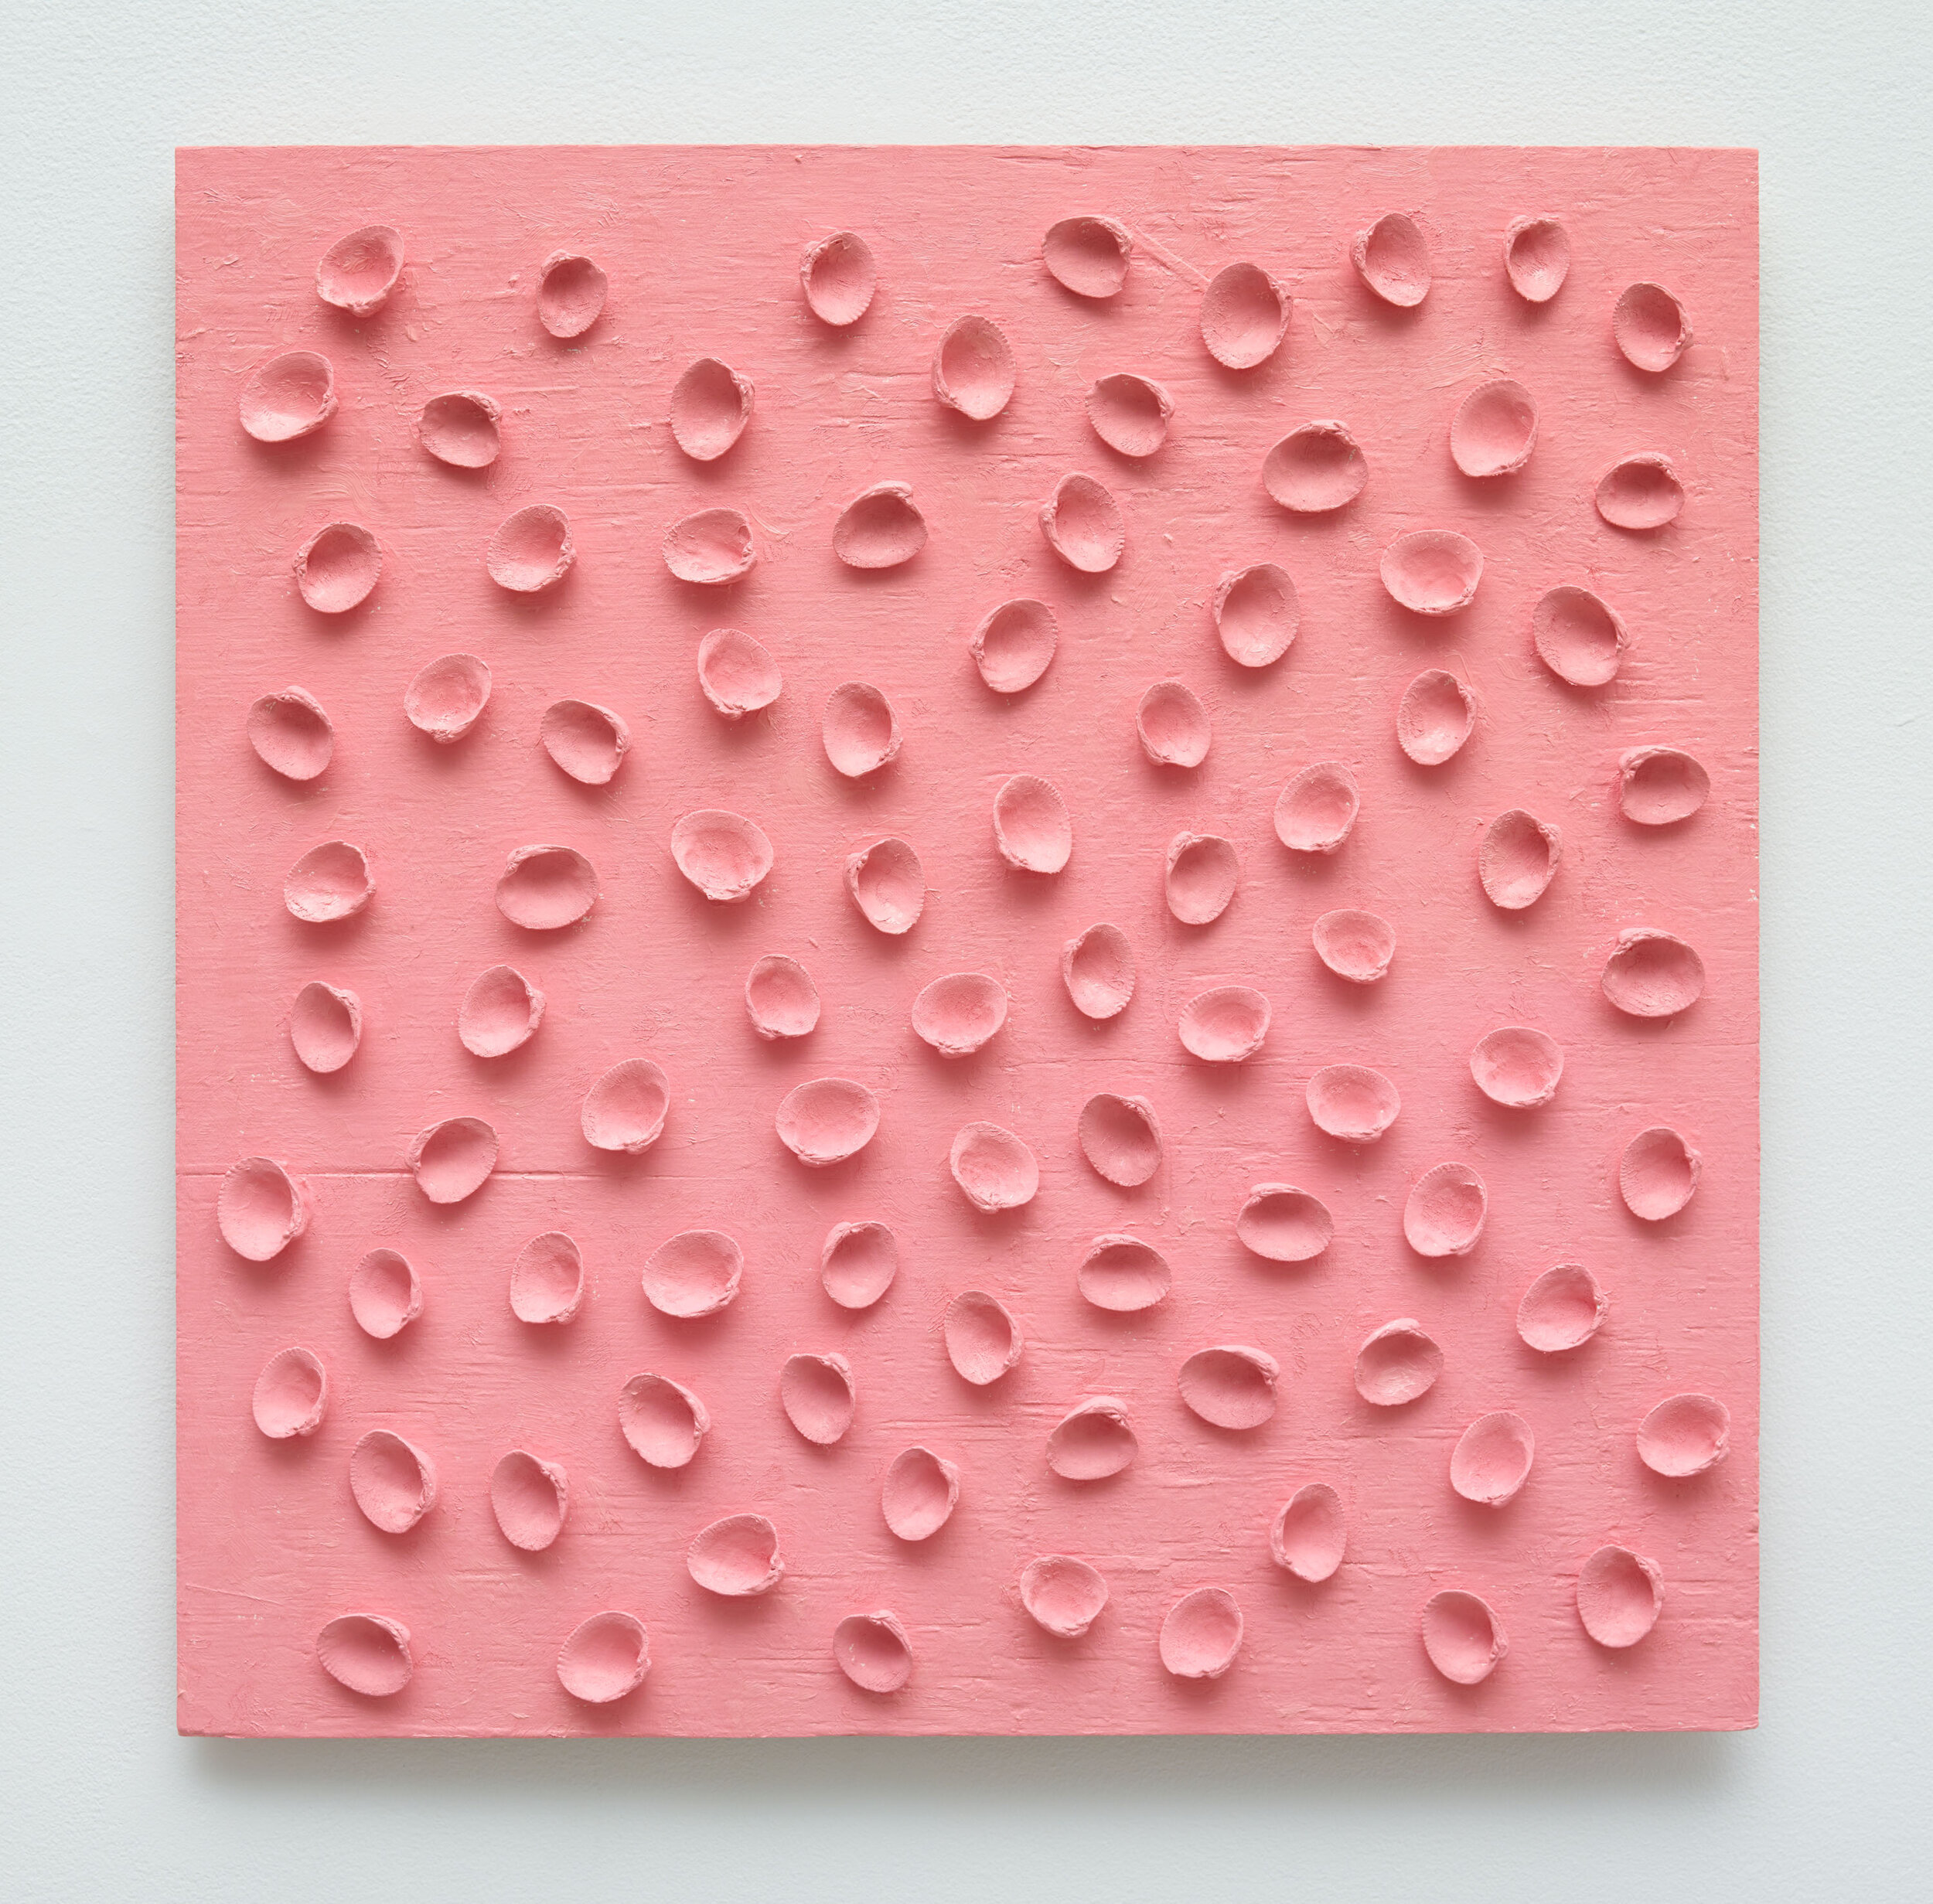 Tony Feher - It didn't turn out the way I expected (Radiant Red), 2010-16